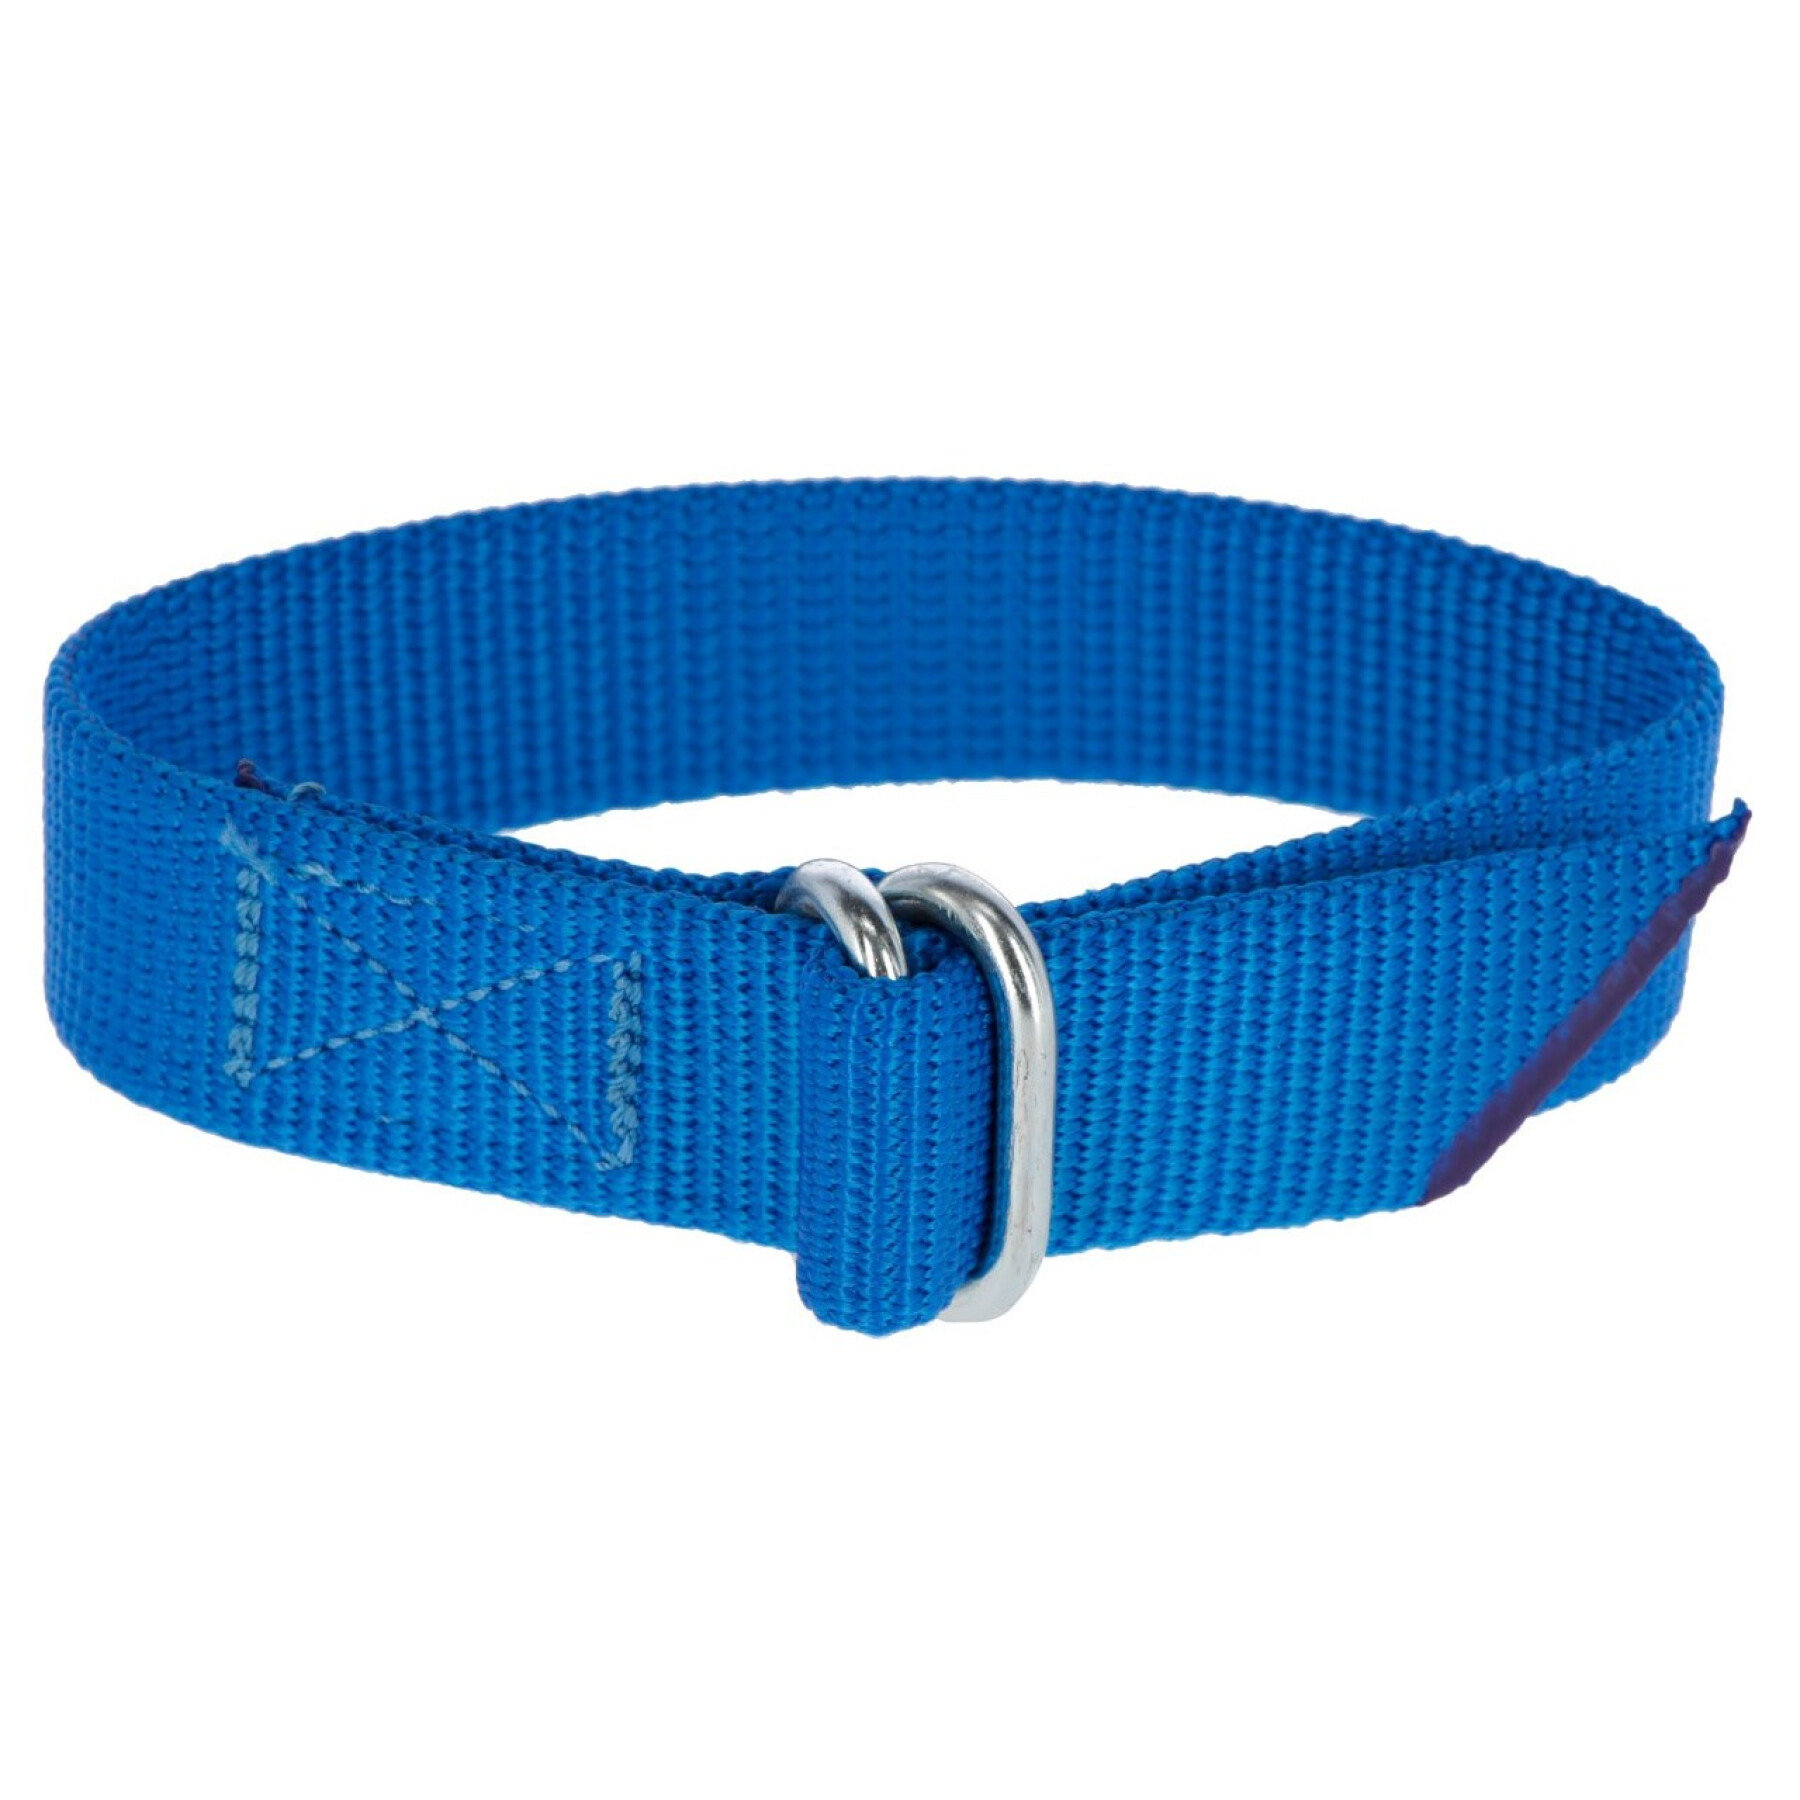 Wristband for marking numbers, buckle closure Kerbl